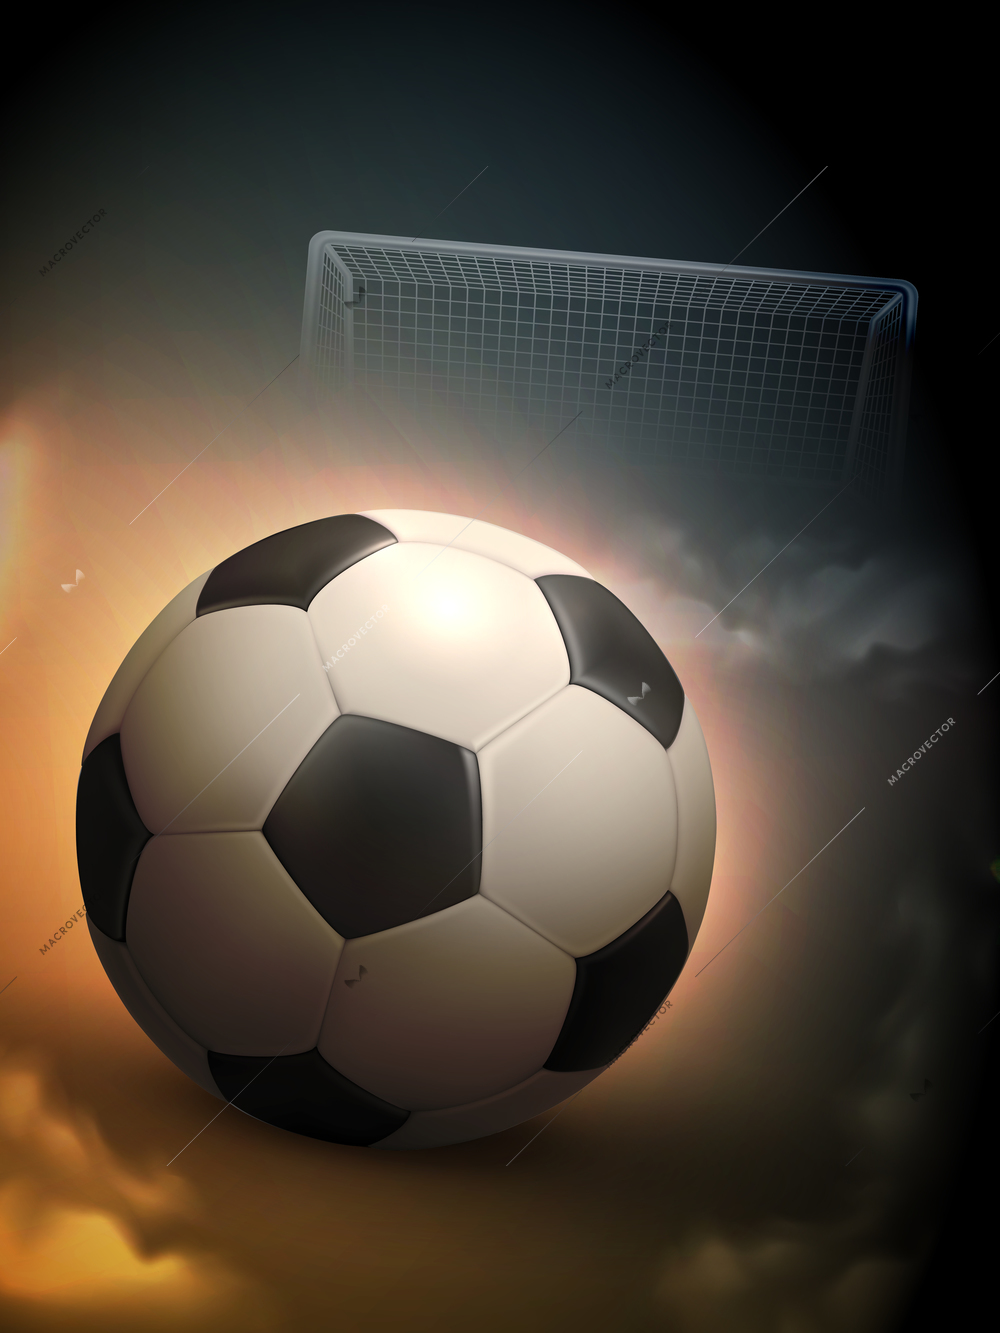 Beautiful goal moment with  glowing in the darkness soccer ball against metallic gates background abstract vector illustration